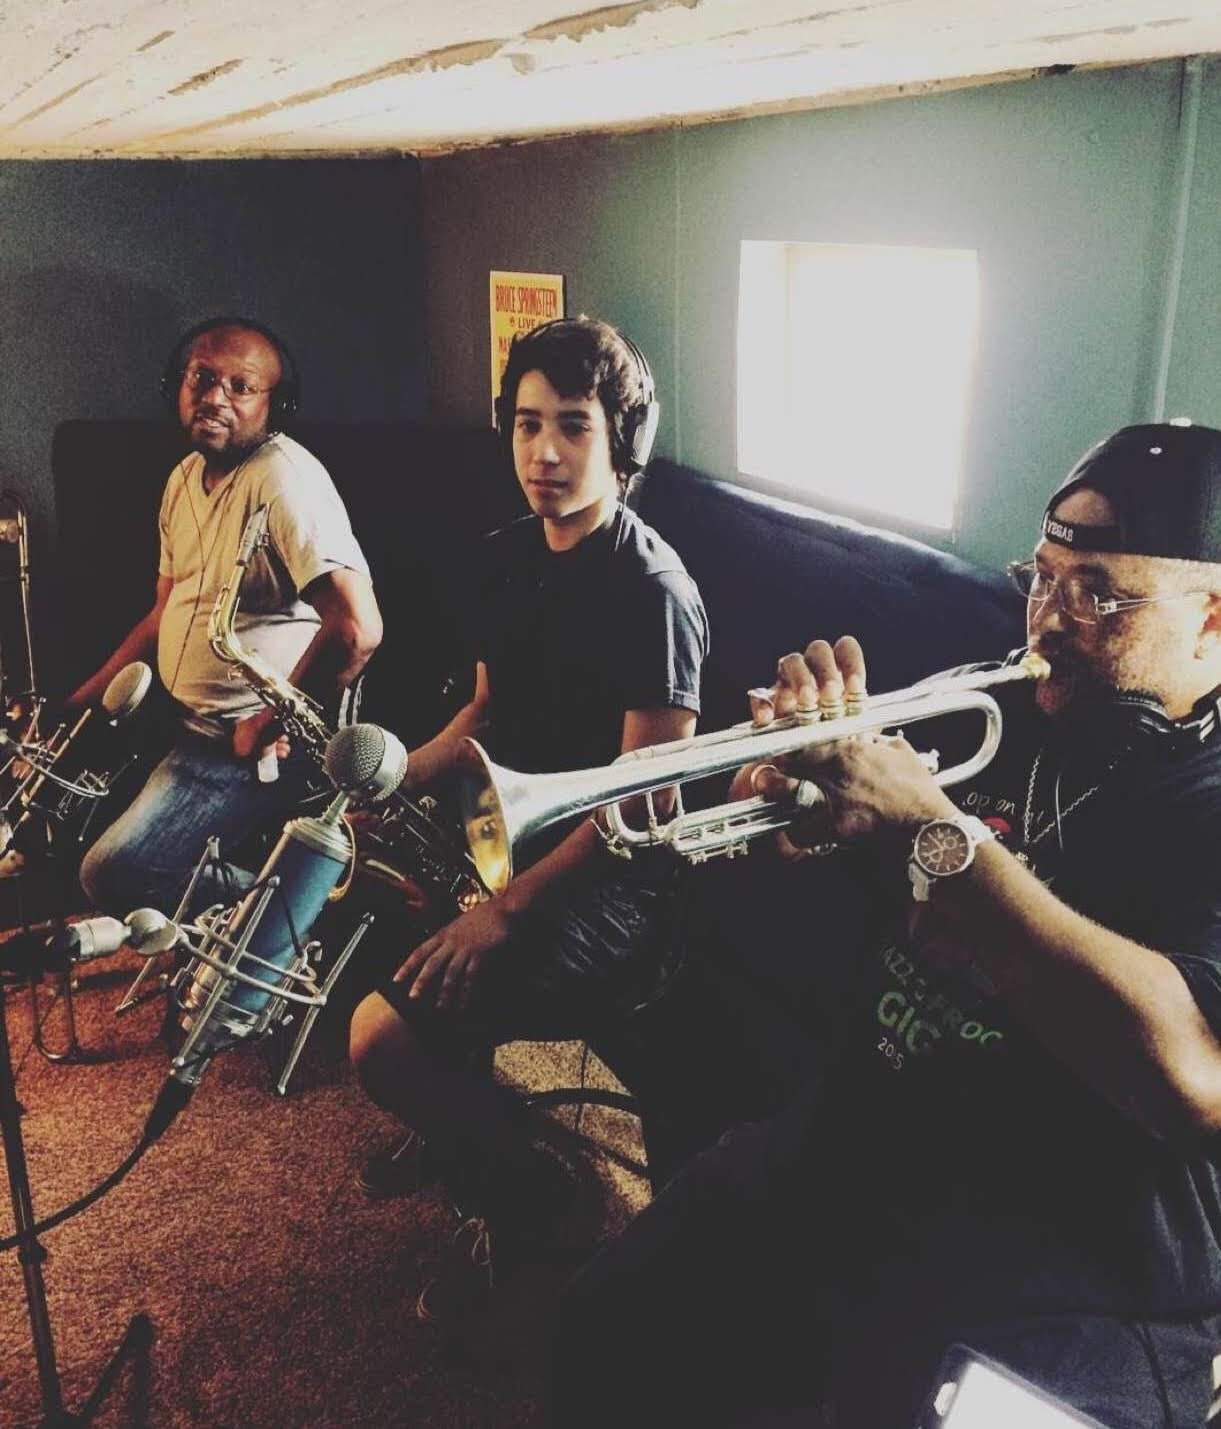 How to Start a Record Label: A ‘Clever’ Story | From left to right: Mike Wade, Eli Gonzalez, and Marvin Curry in a recording session with Clever Records, August 2016.